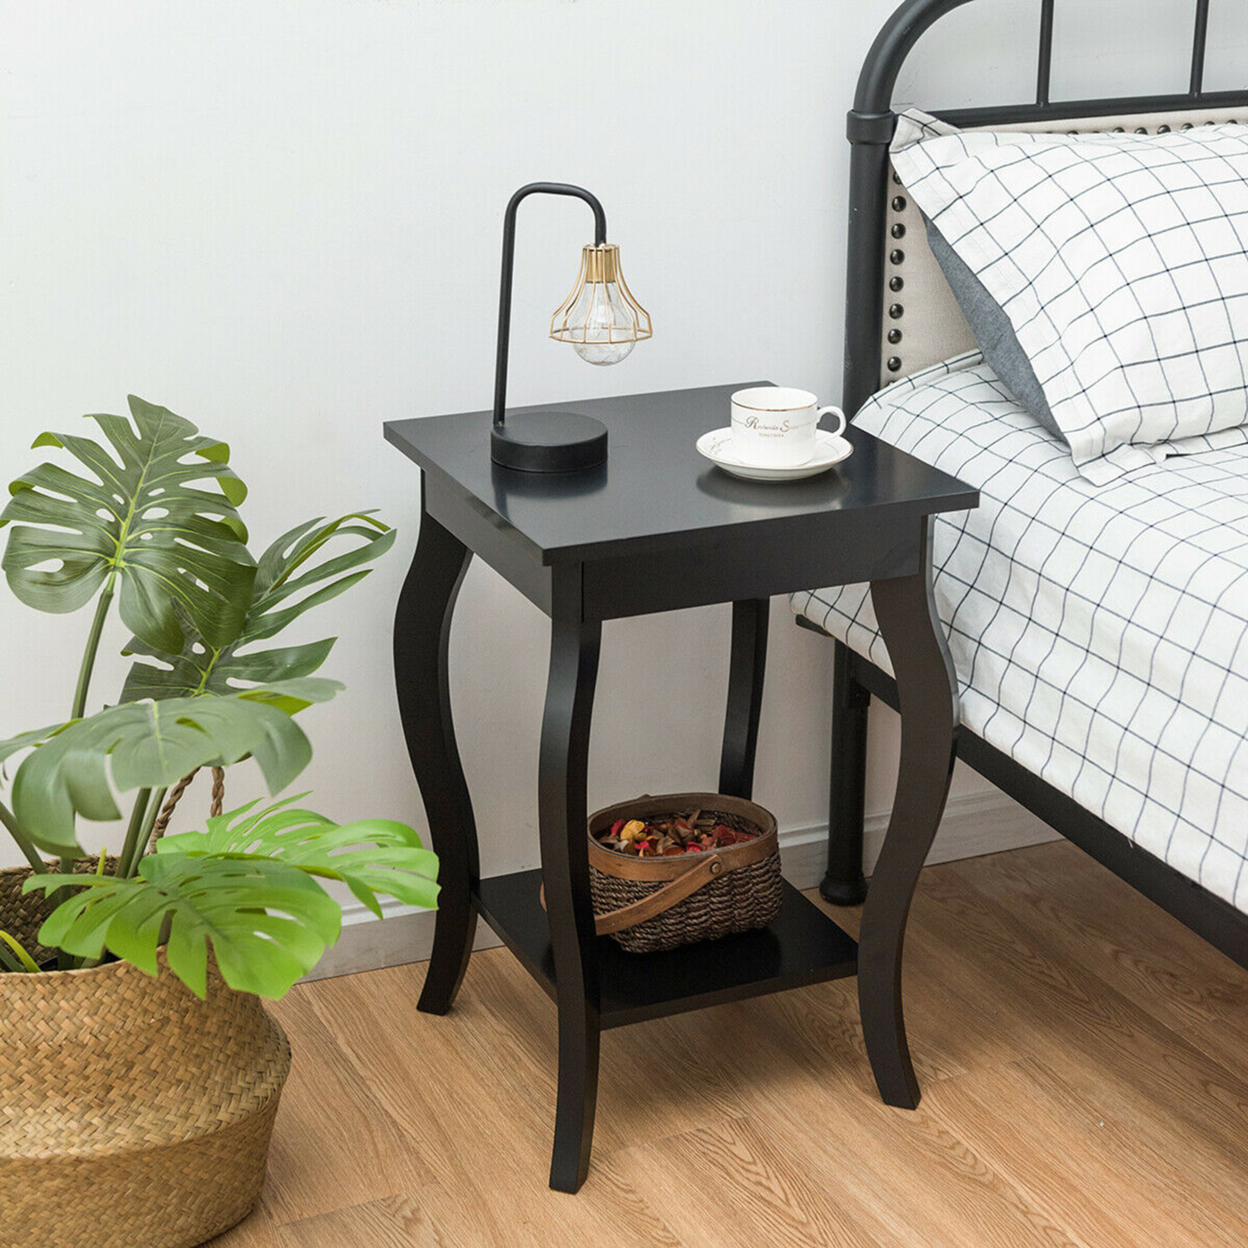 Set Of 2 Accent Side Table Sofa End Table Nightstand Coffee Table W/ Shelf Black